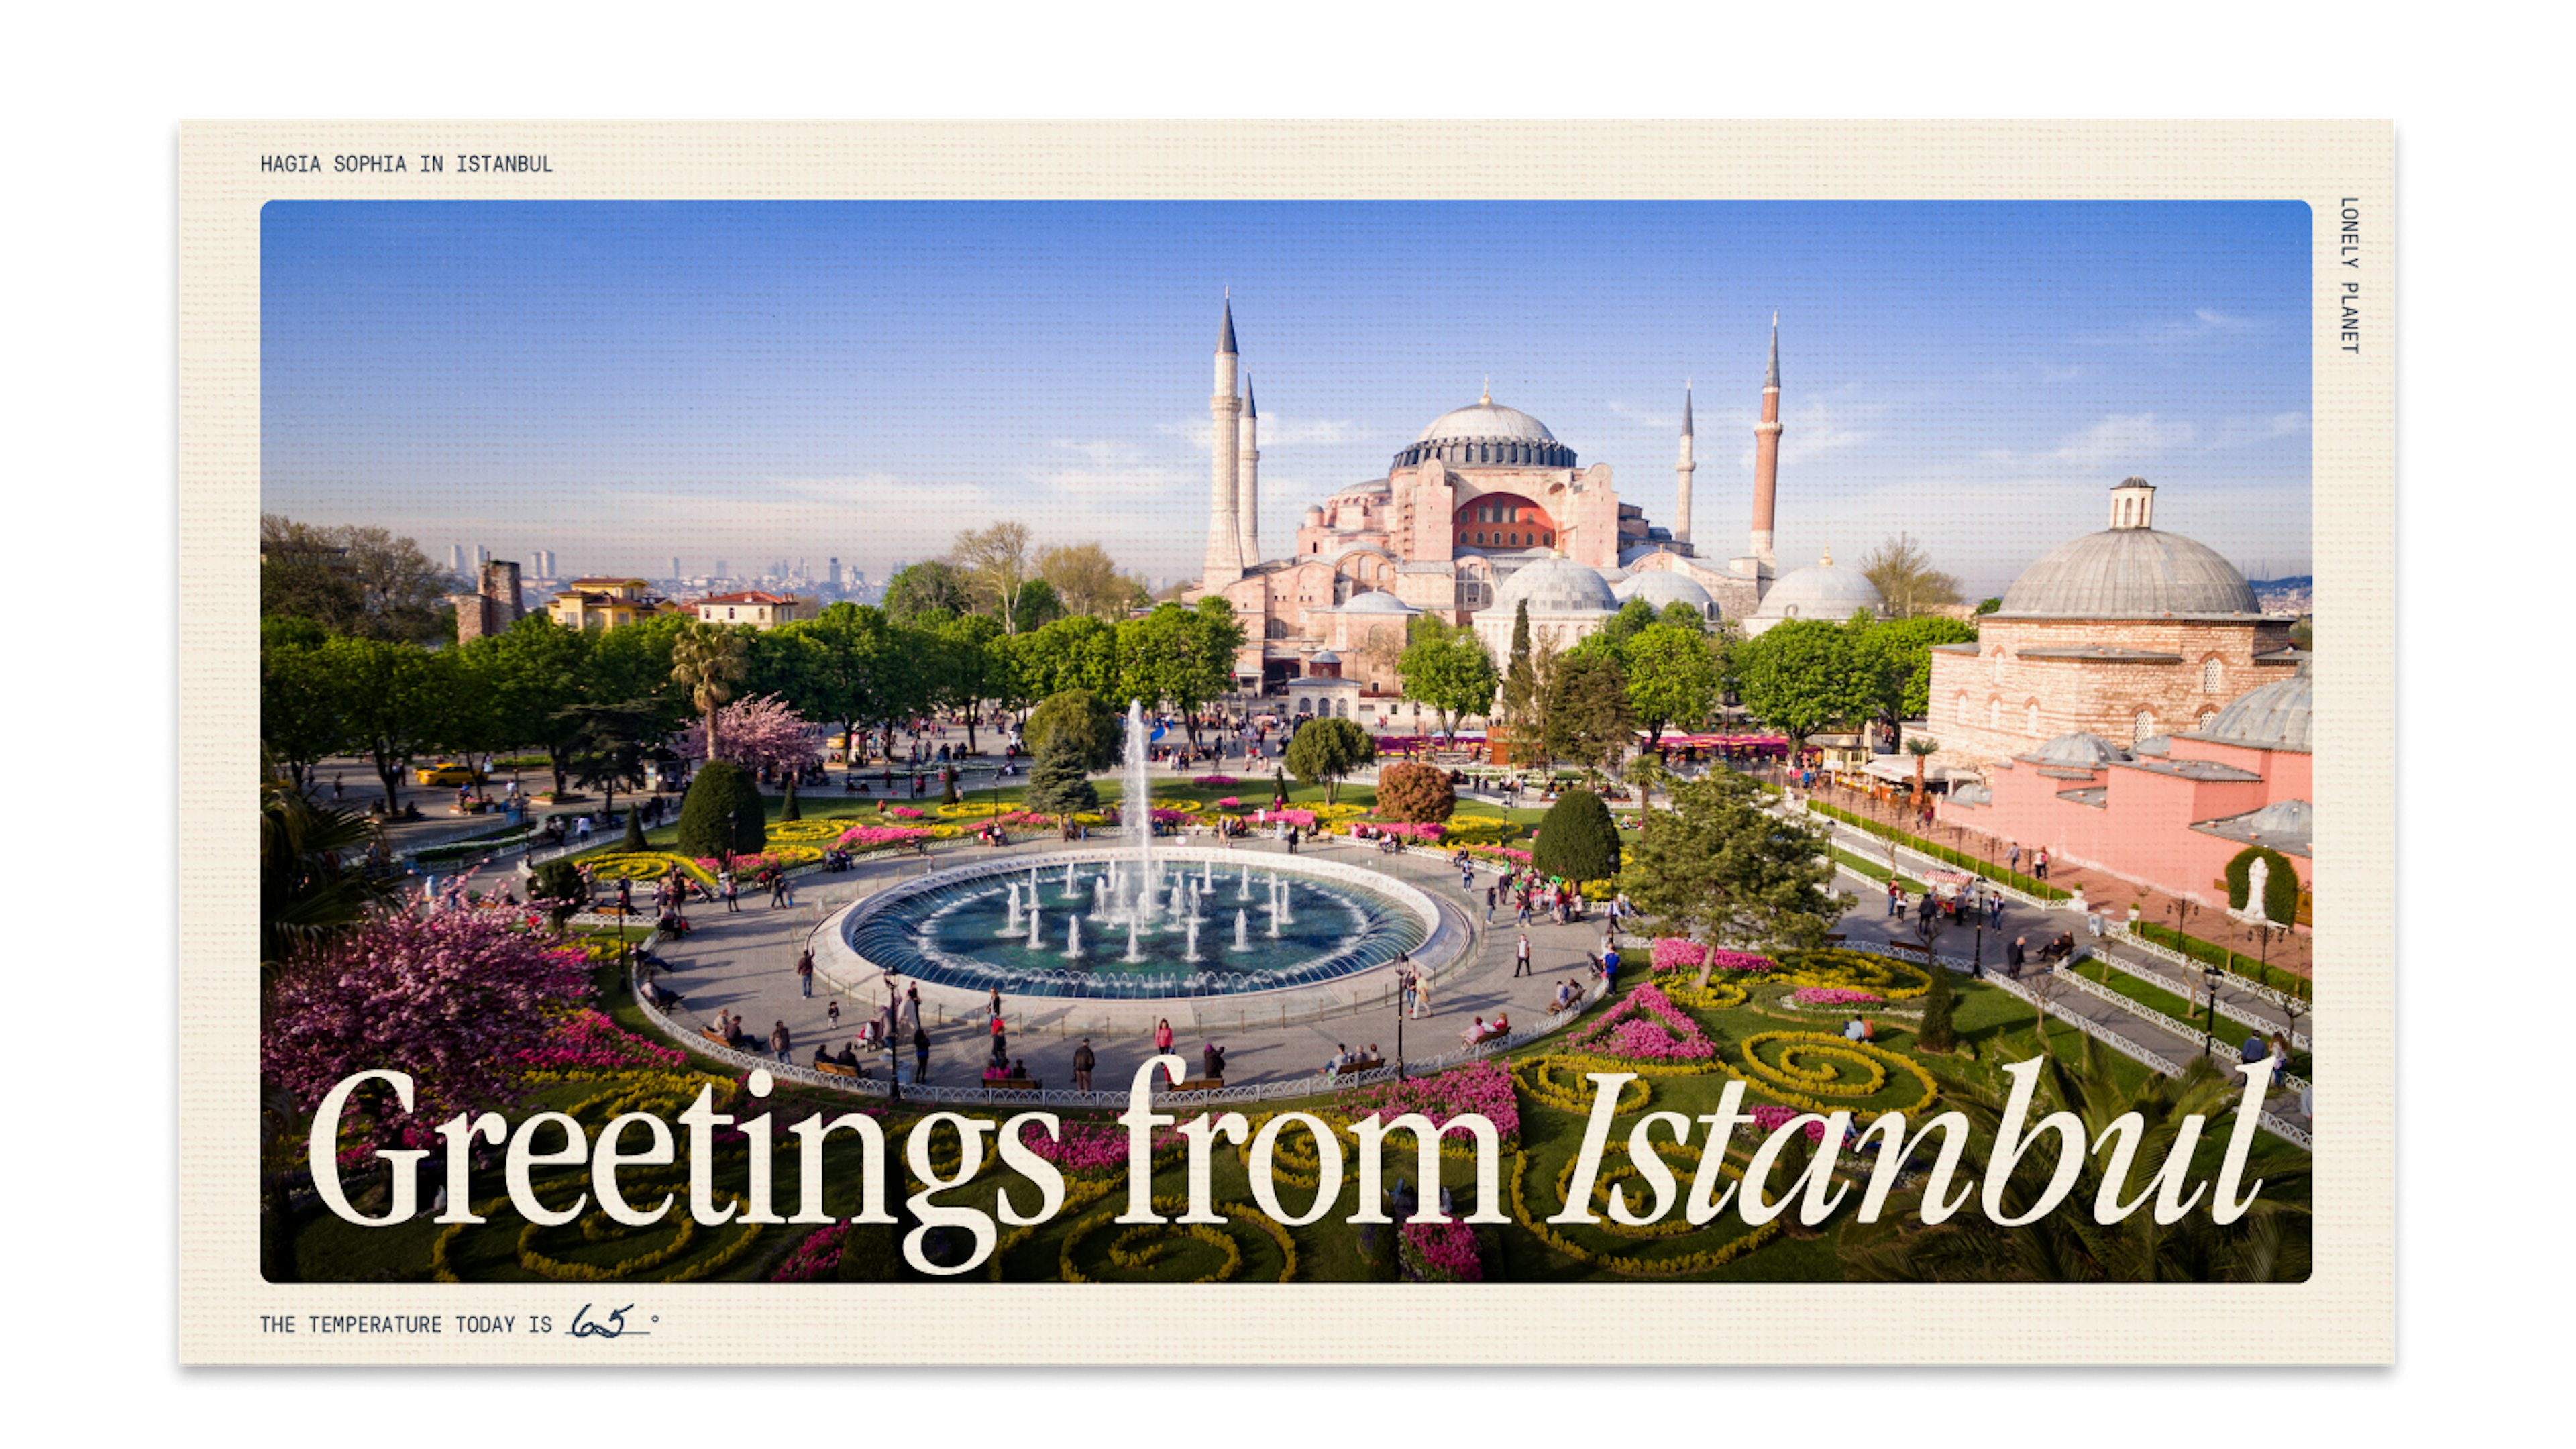 Greetings from Istanbul